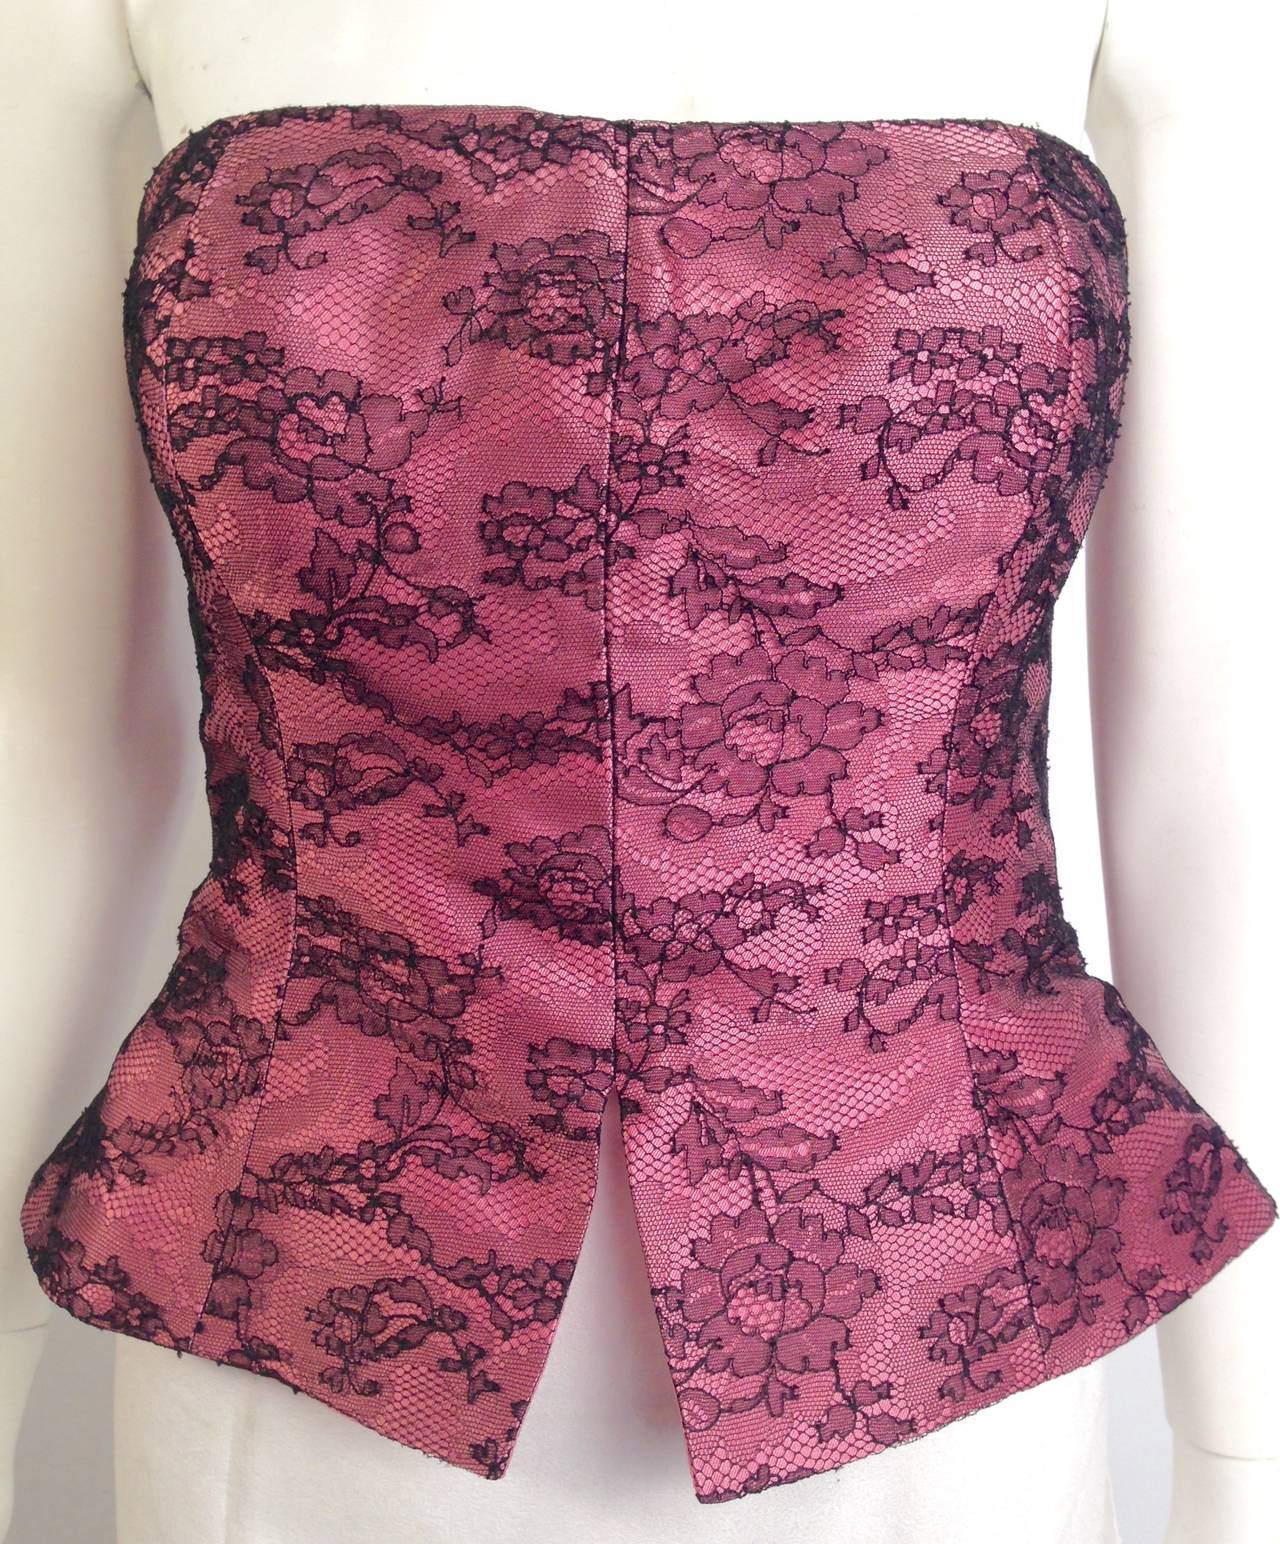 Women's Christian Lacroix Silk Evening Jacket With Lace Overlay Bustier